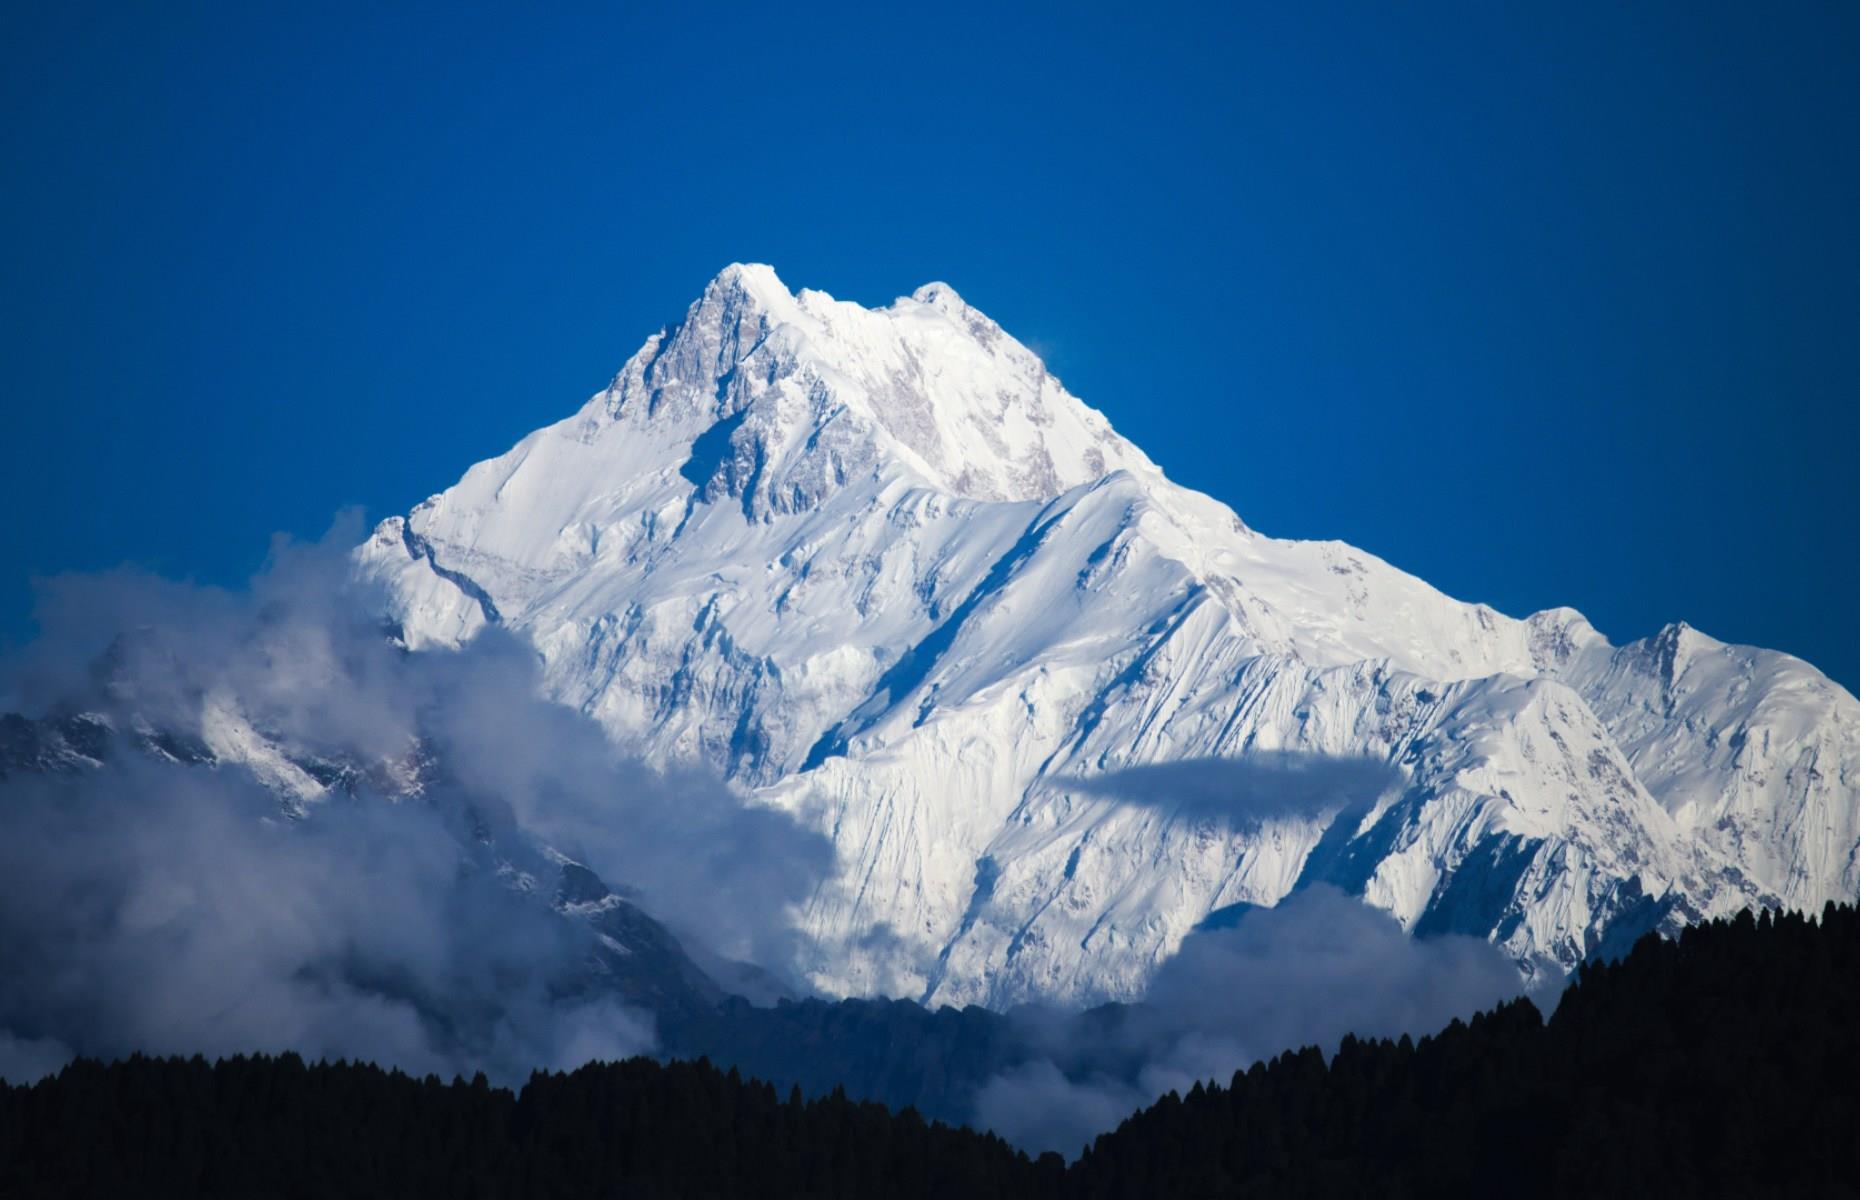 <p>Kanchenjunga is the second-highest Himalayan peak and the third-highest on Earth at an eye-watering 28,169 feet (8,586m) tall. It’s located in the eastern part of the mountain range on the Nepal-India border. Although shorter than Everest, it’s considered a more treacherous climb since less is known about it – <a href="https://indianexpress.com/article/explained/explained-why-climbing-mount-kanchenjunga-is-still-a-challenge-for-those-who-have-scaled-everest-5734121/">just around 20-25 people attempt to summit each year</a> compared to the 300-350 that climb Everest. </p>